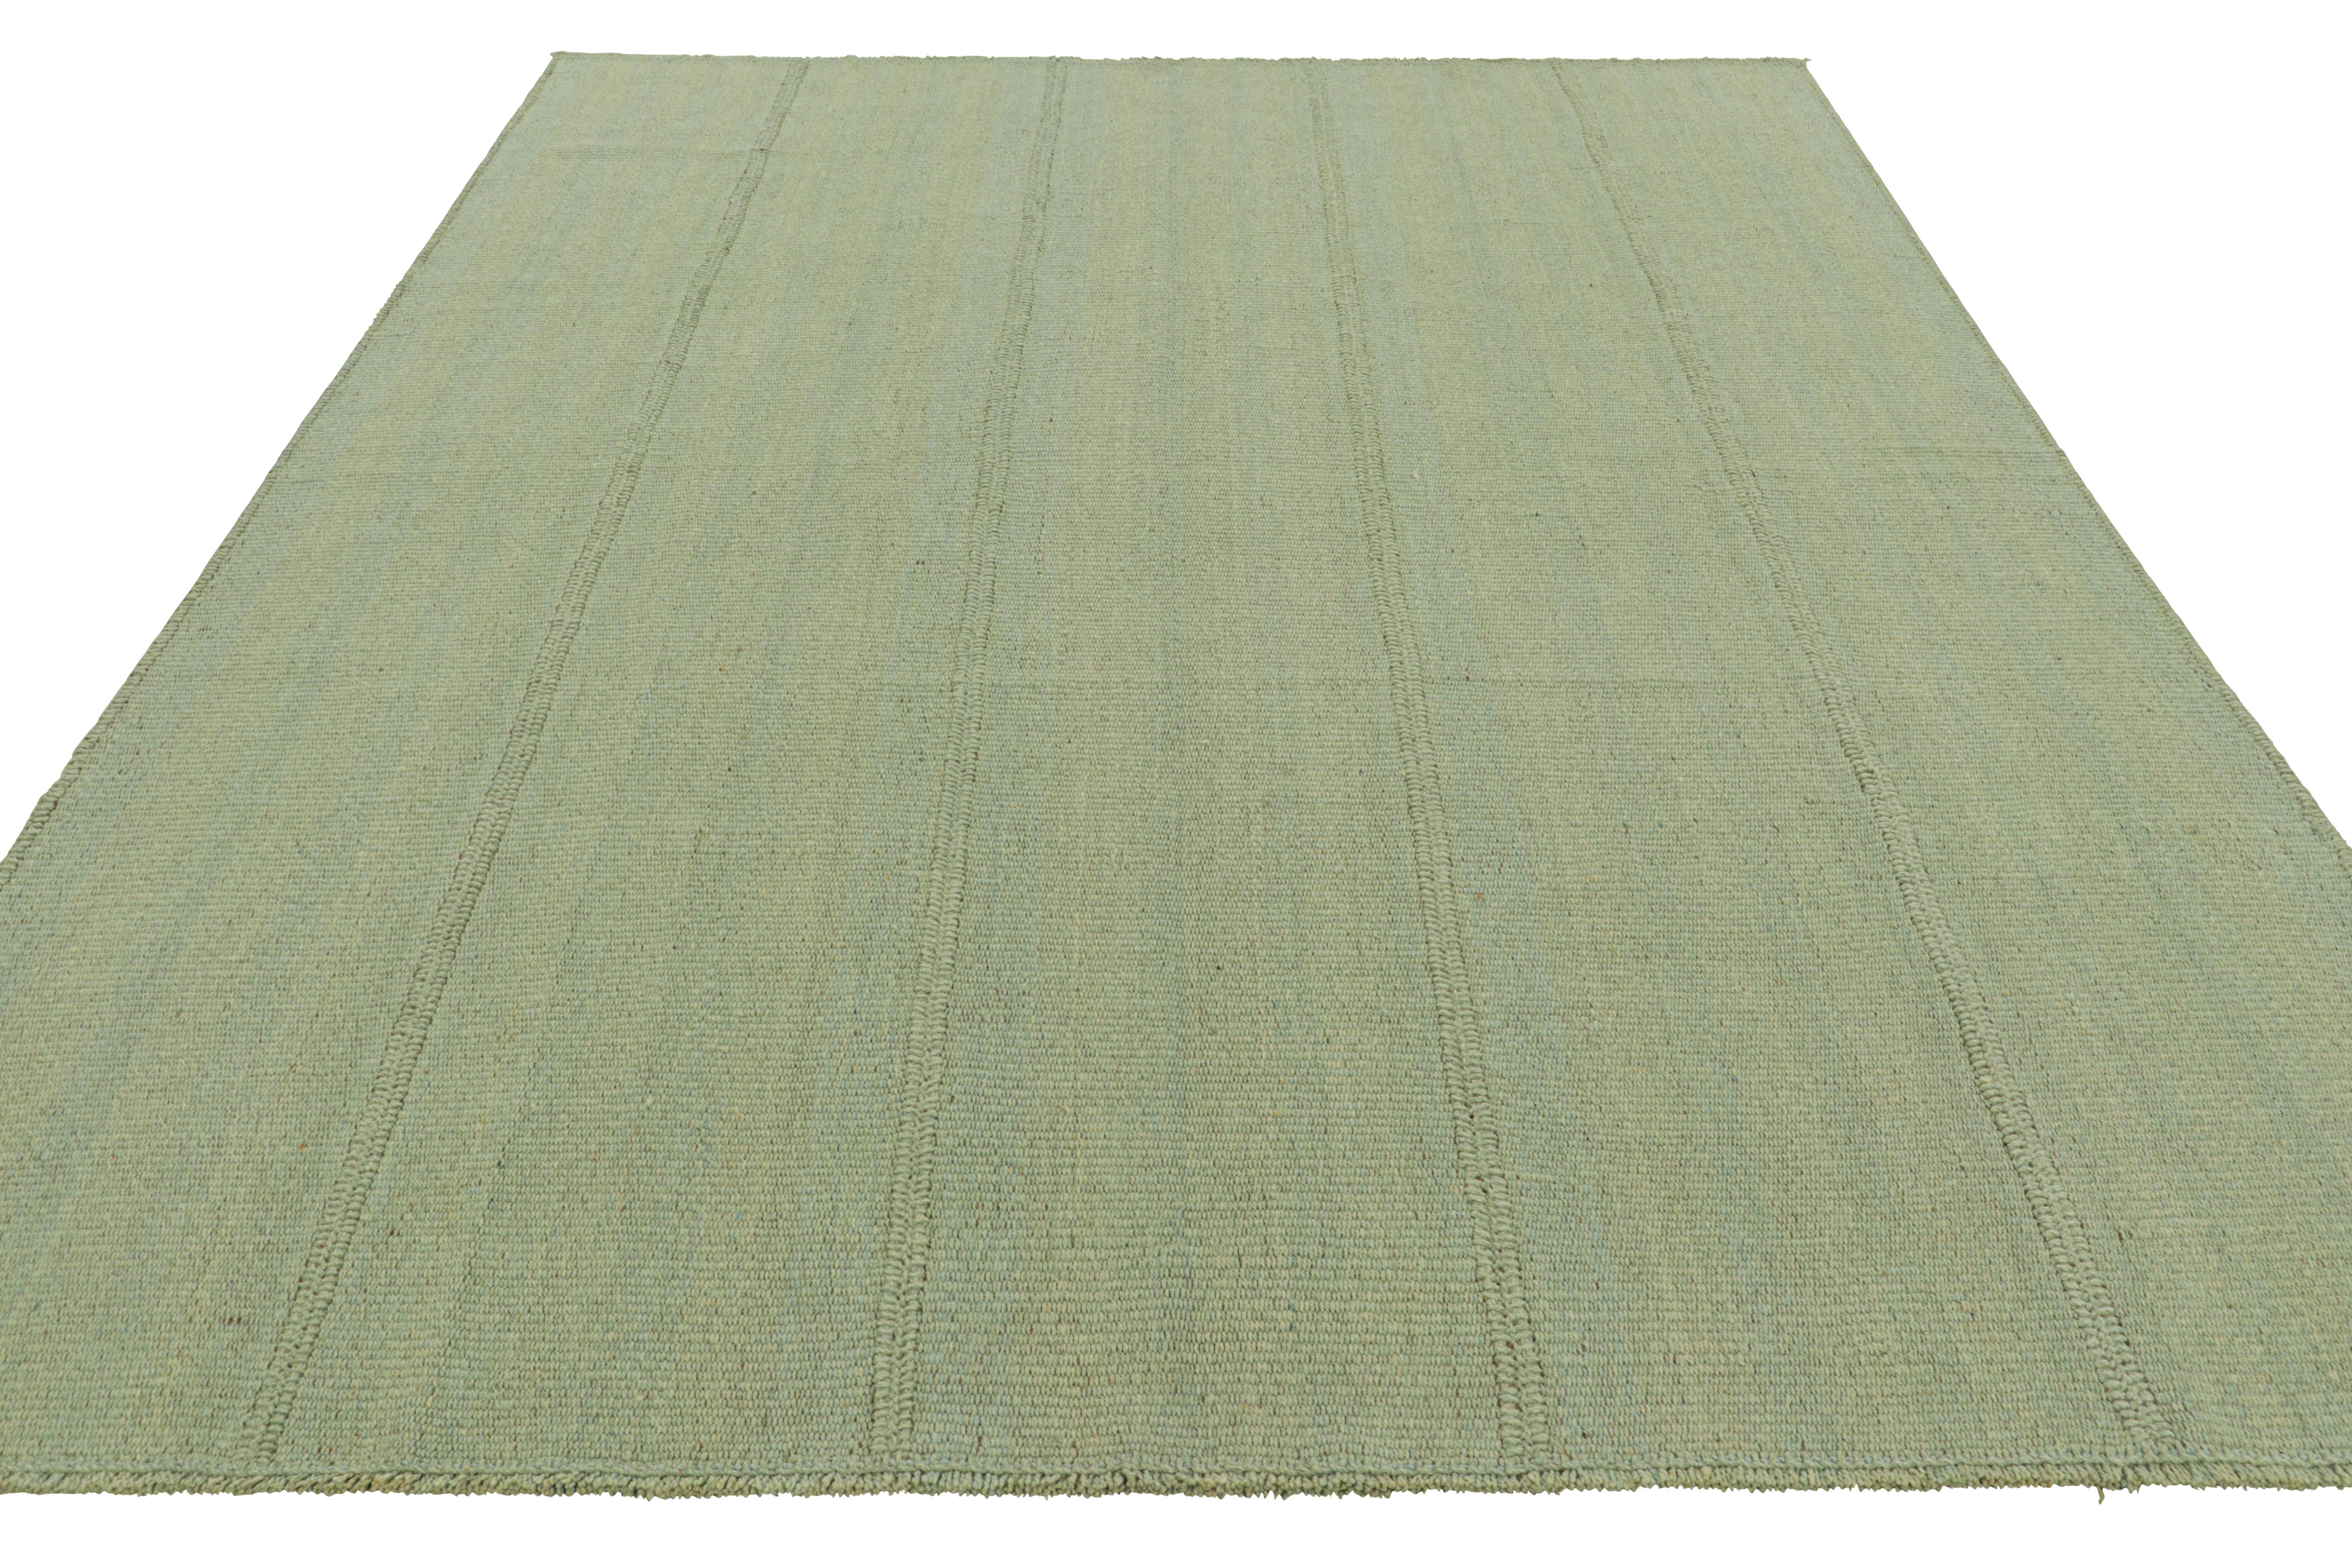 Hand-Woven Rug & Kilim’s Contemporary Kilim in Seafoam Green and Blue Textural Stripes For Sale